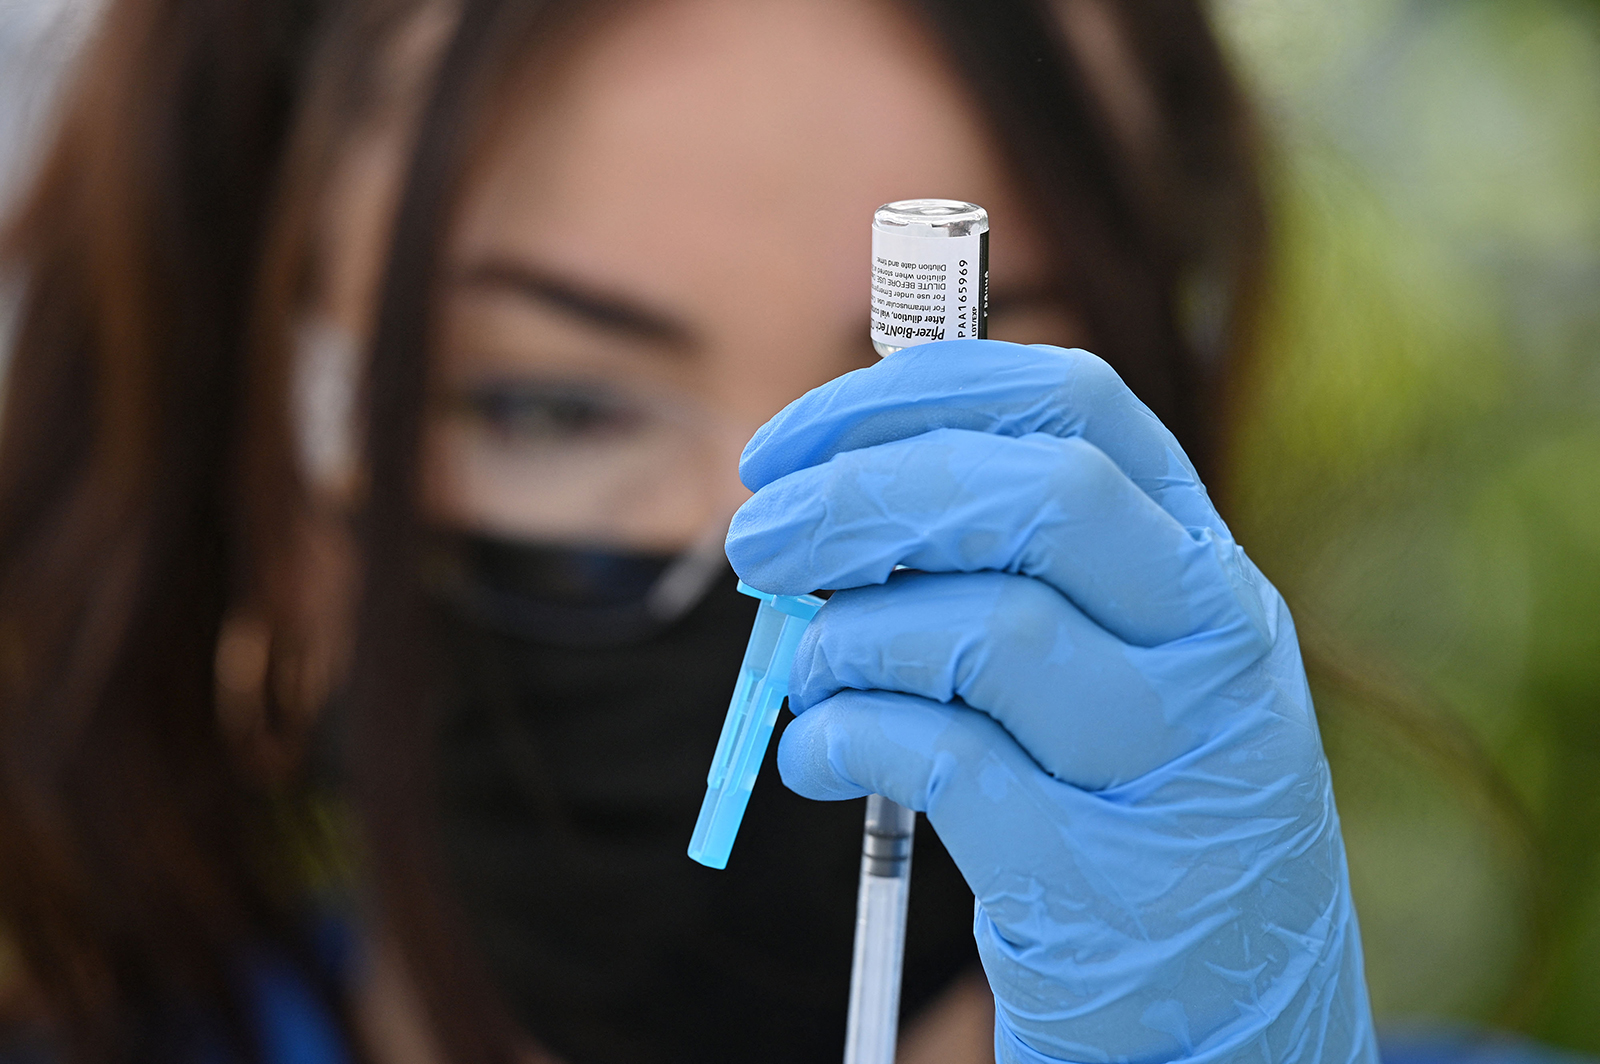 A healthcare worker fills a syringe with Pfizer Covid-19 vaccine at a community vaccination event in Los Angeles on August 11.